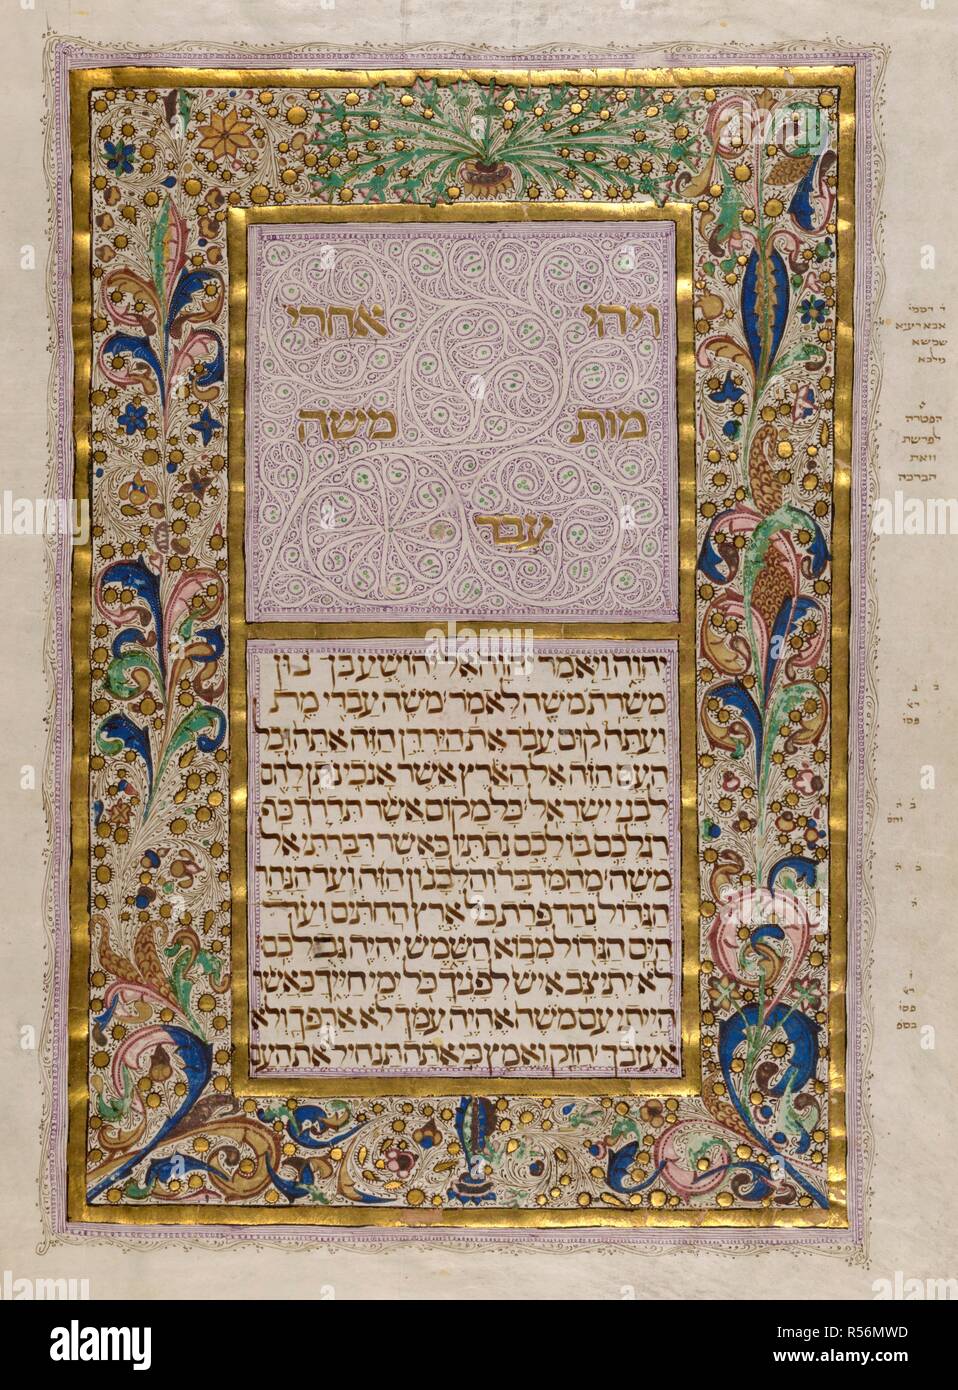 Opening page to the Book of Joshua. Lisbon Bible. Lisbon, 1482. Parchment manuscript. Source: Or. 2627 volume 2, f.1v. Language: Hebrew. Author: Samuel ben Samuel ibn Musa. Stock Photo